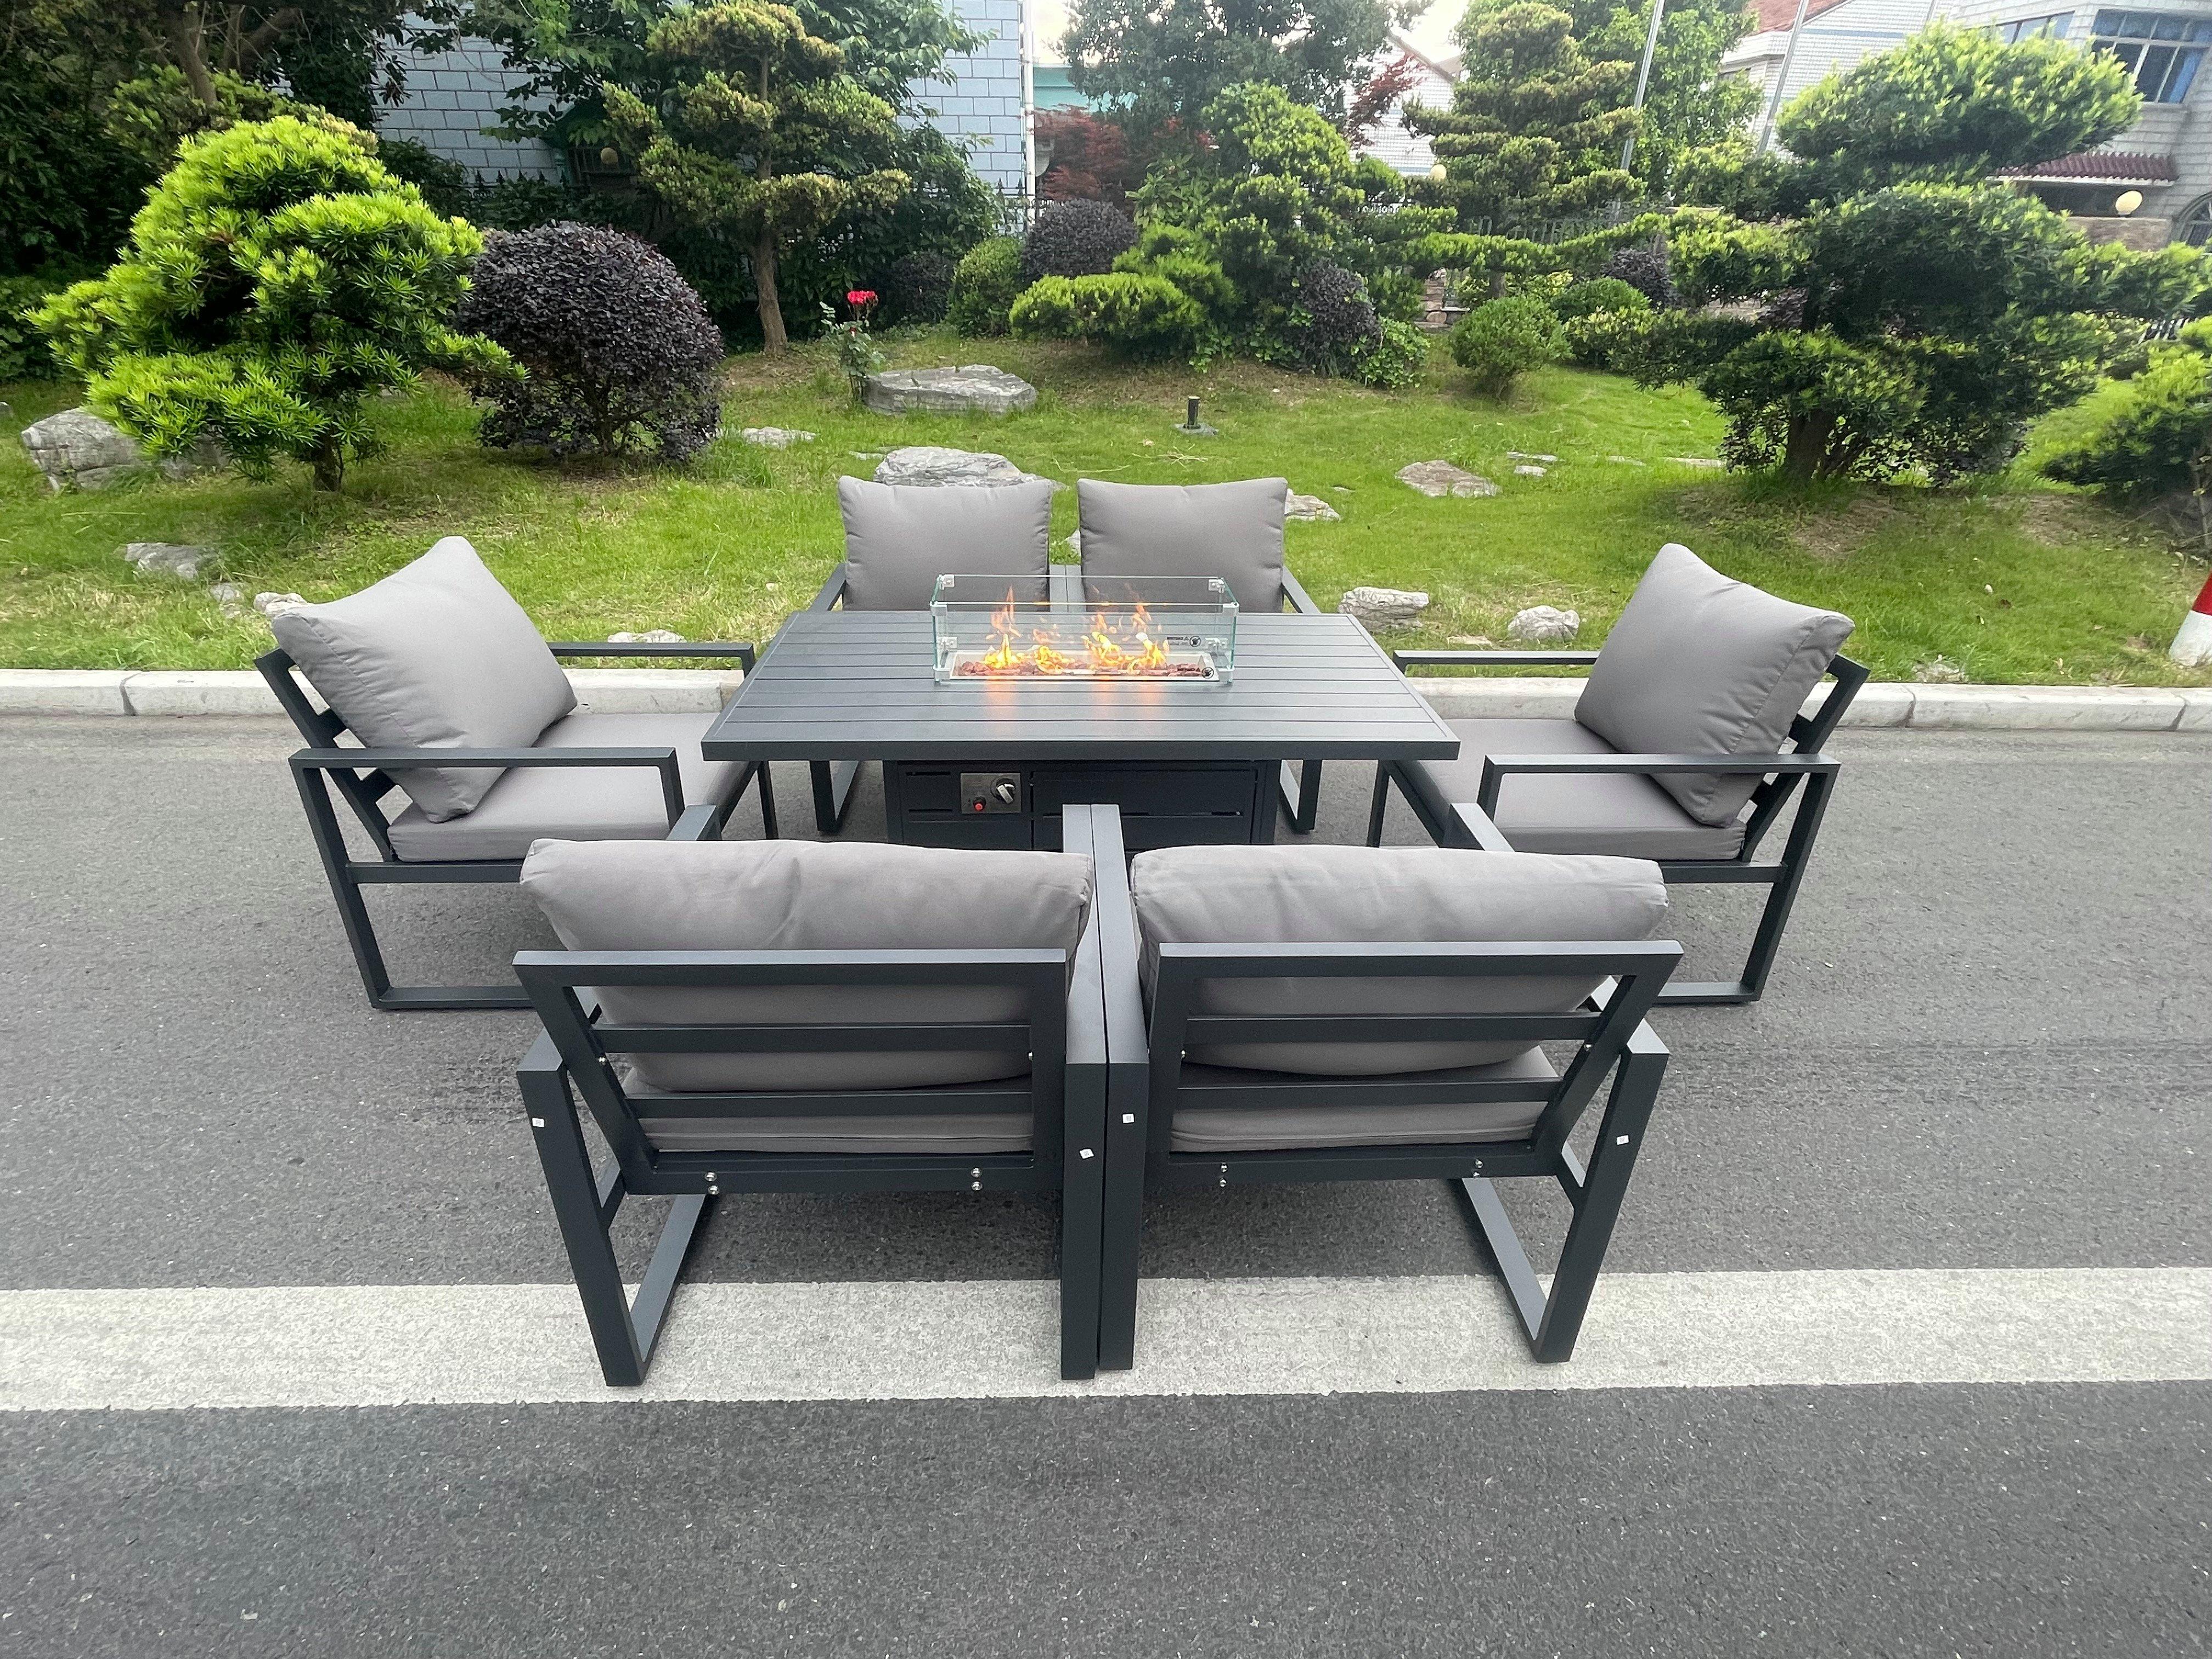 Aluminum Top 6 Seat Garden Furniture Dining Set Gas Fire Pit Table And Chairs Burner Heater Patio Ou